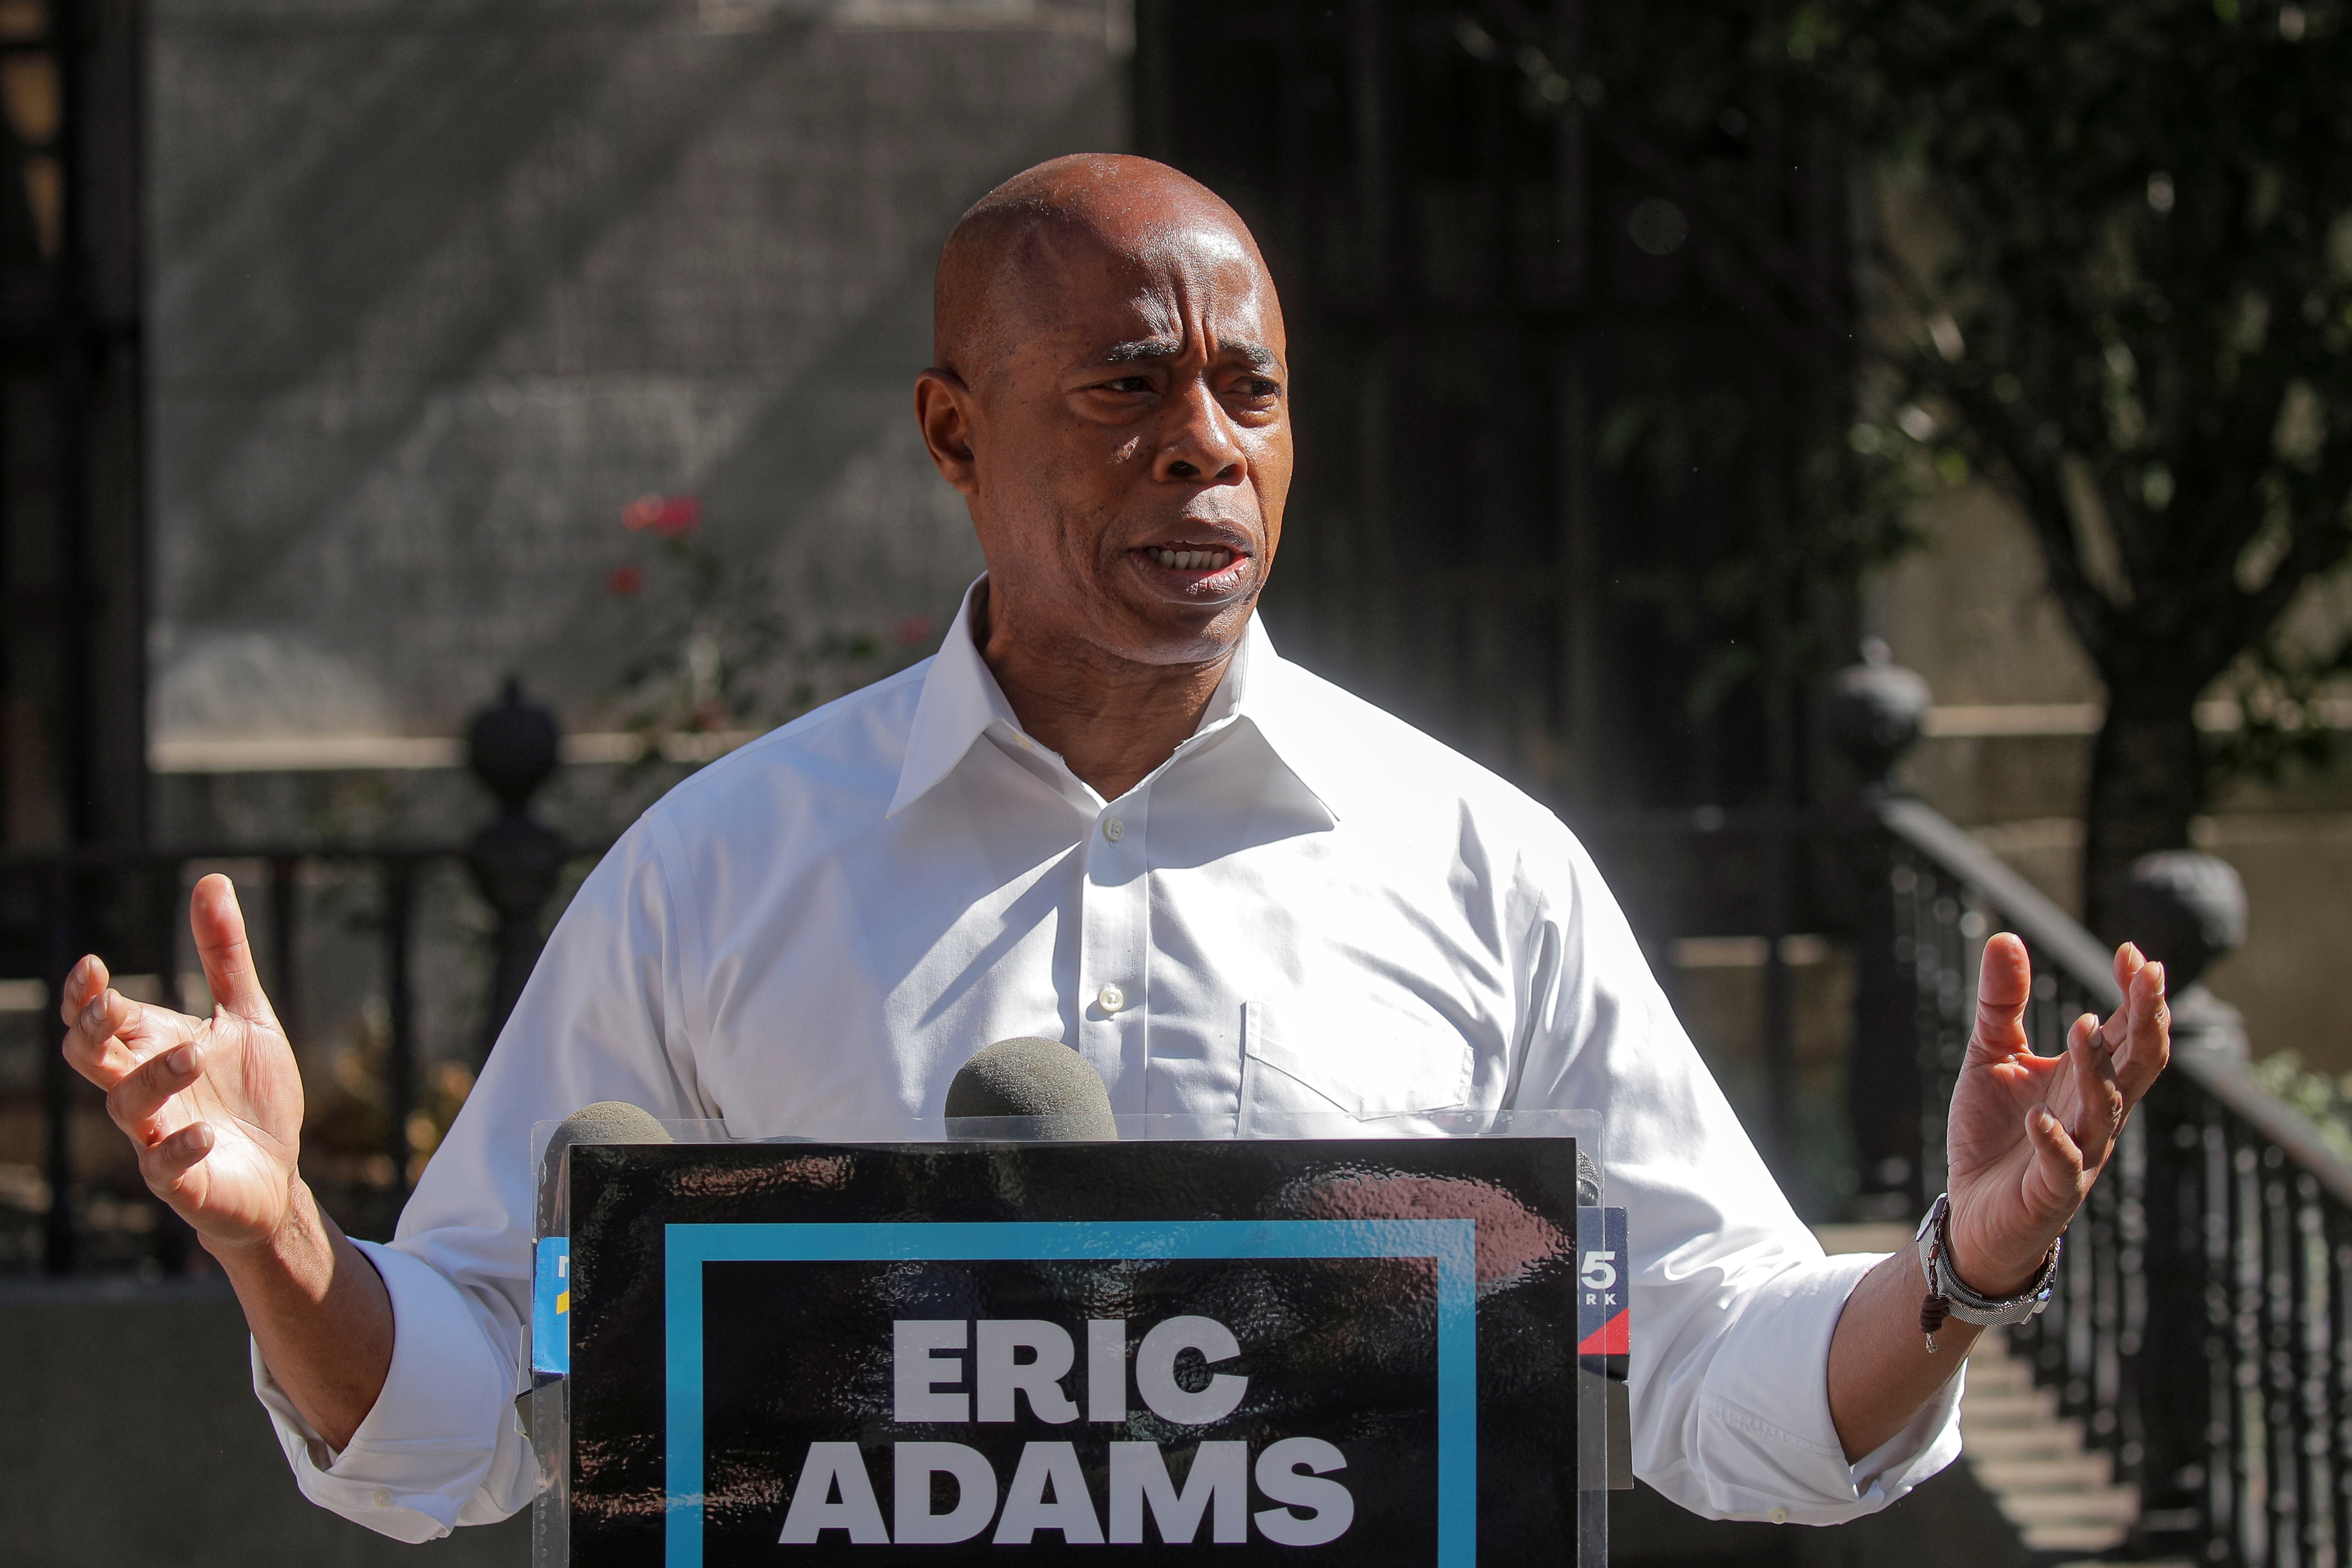 Eric Adams speaks during a news conference outside Brooklyn borough hall in Brooklyn, New York